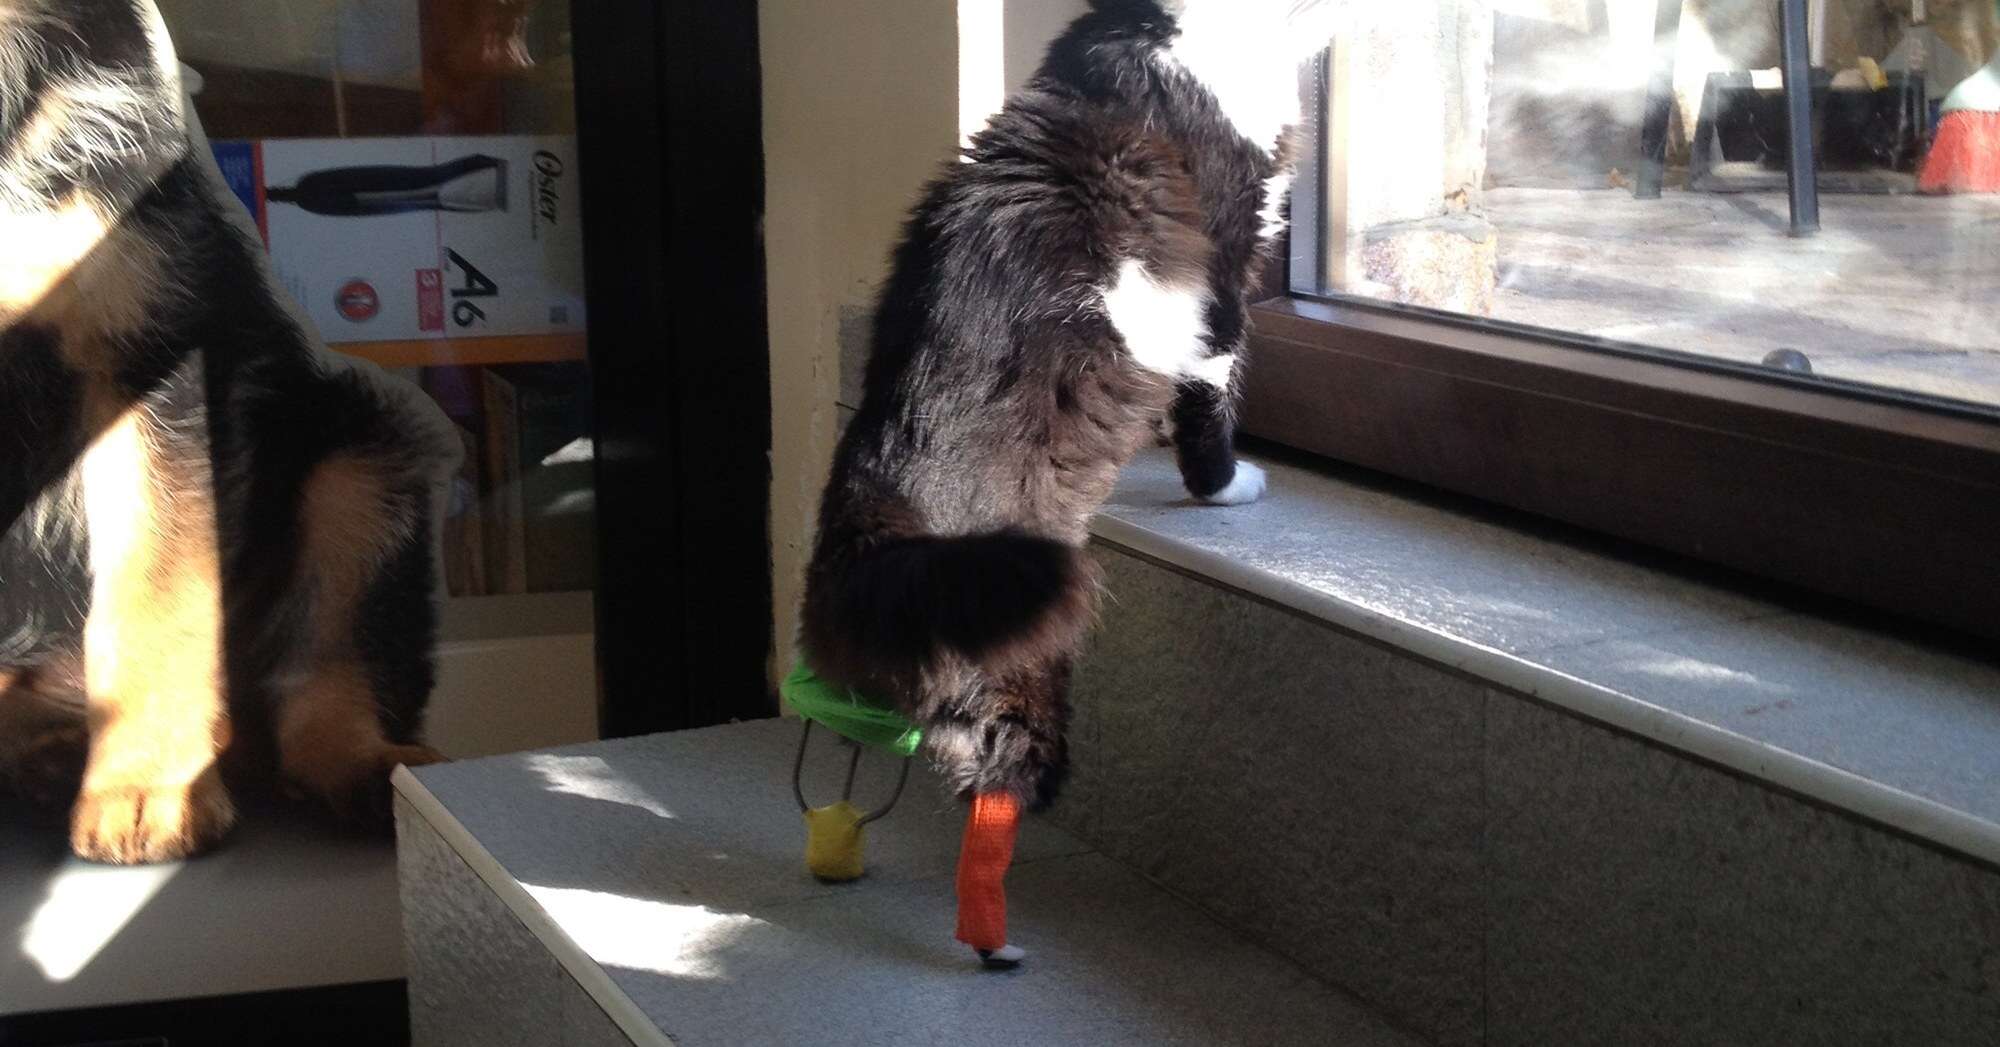 Pooh the cat with his new peg legs